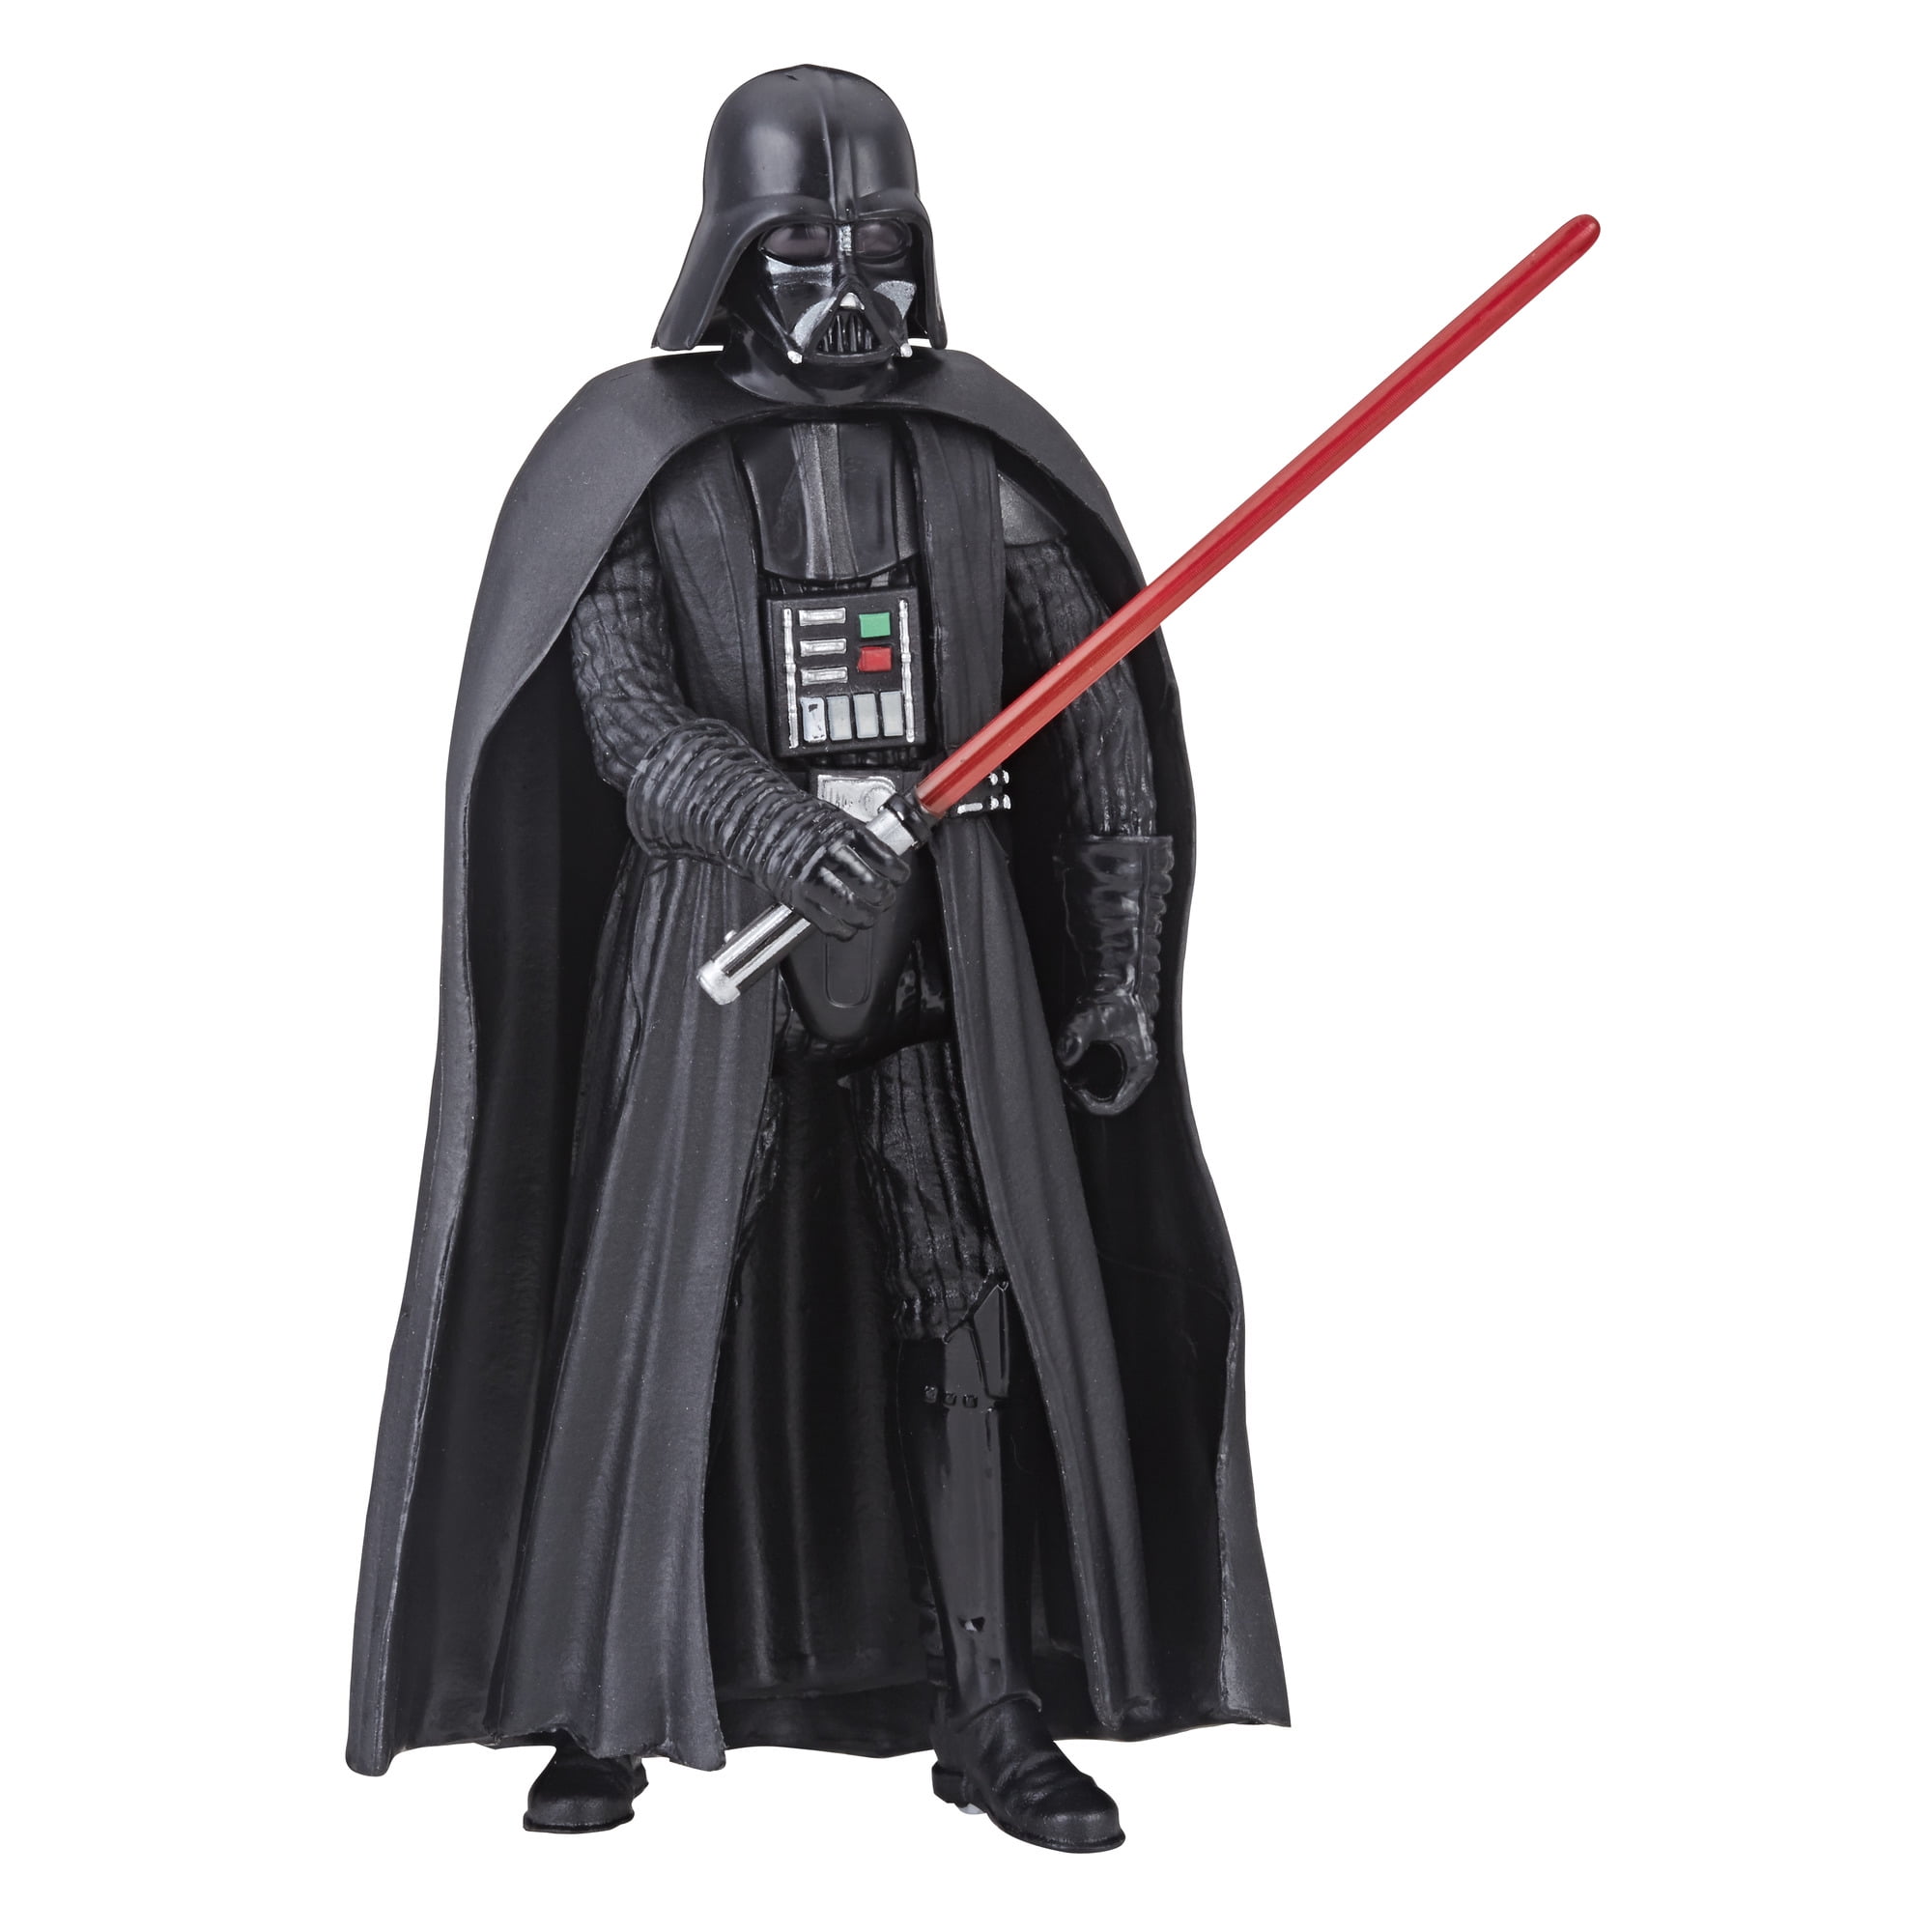 Star Wars Galaxy of Adventures Darth Vader 5-inch Scale Action Figure *BRAND NEW